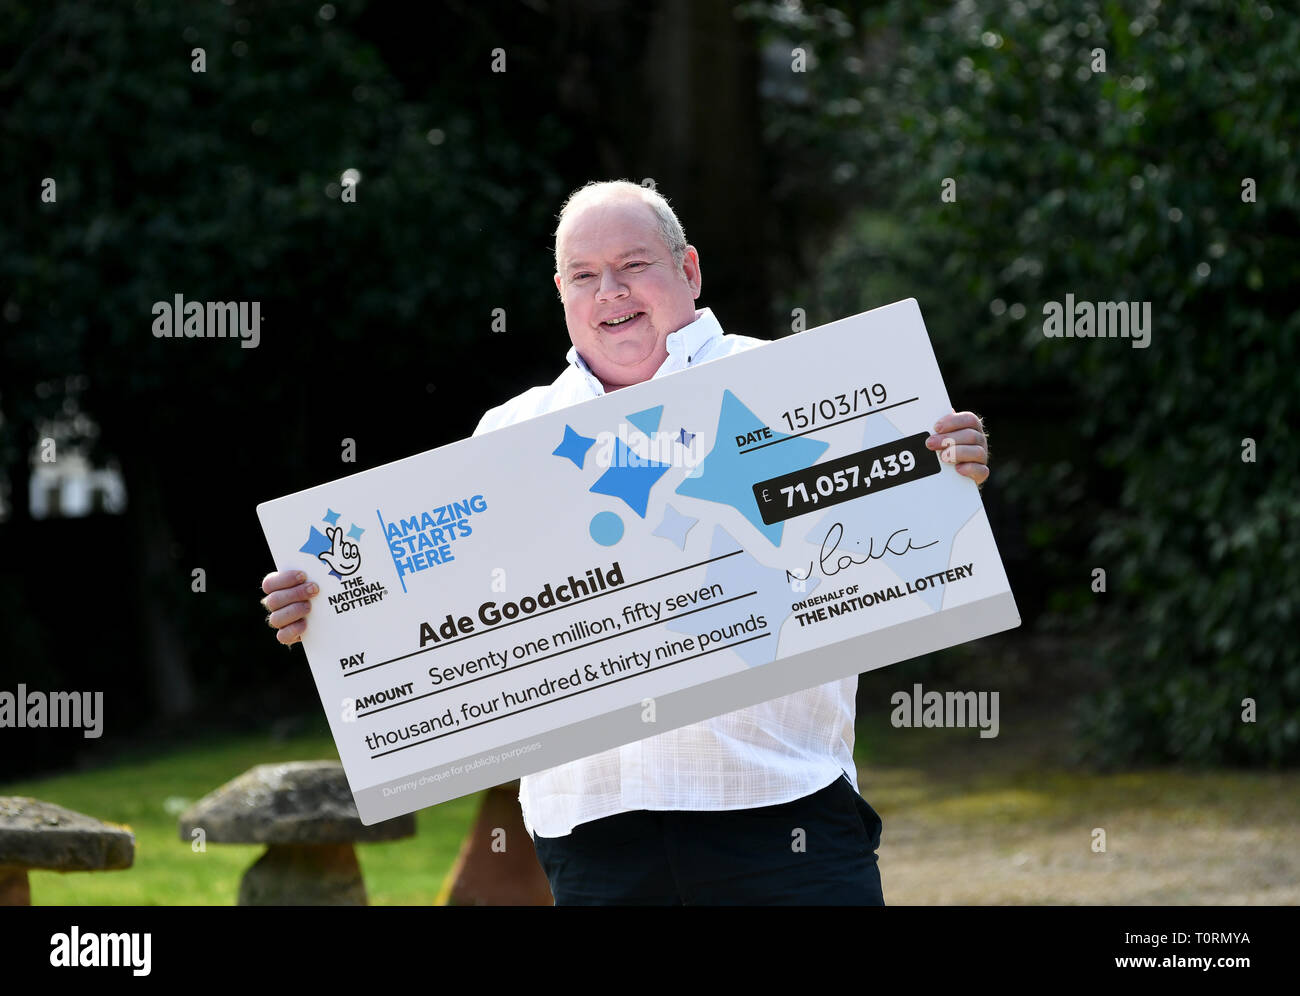 National Lottery winner Ade Goodchild of Hereford winner of the £71,057,439 prize Stock Photo